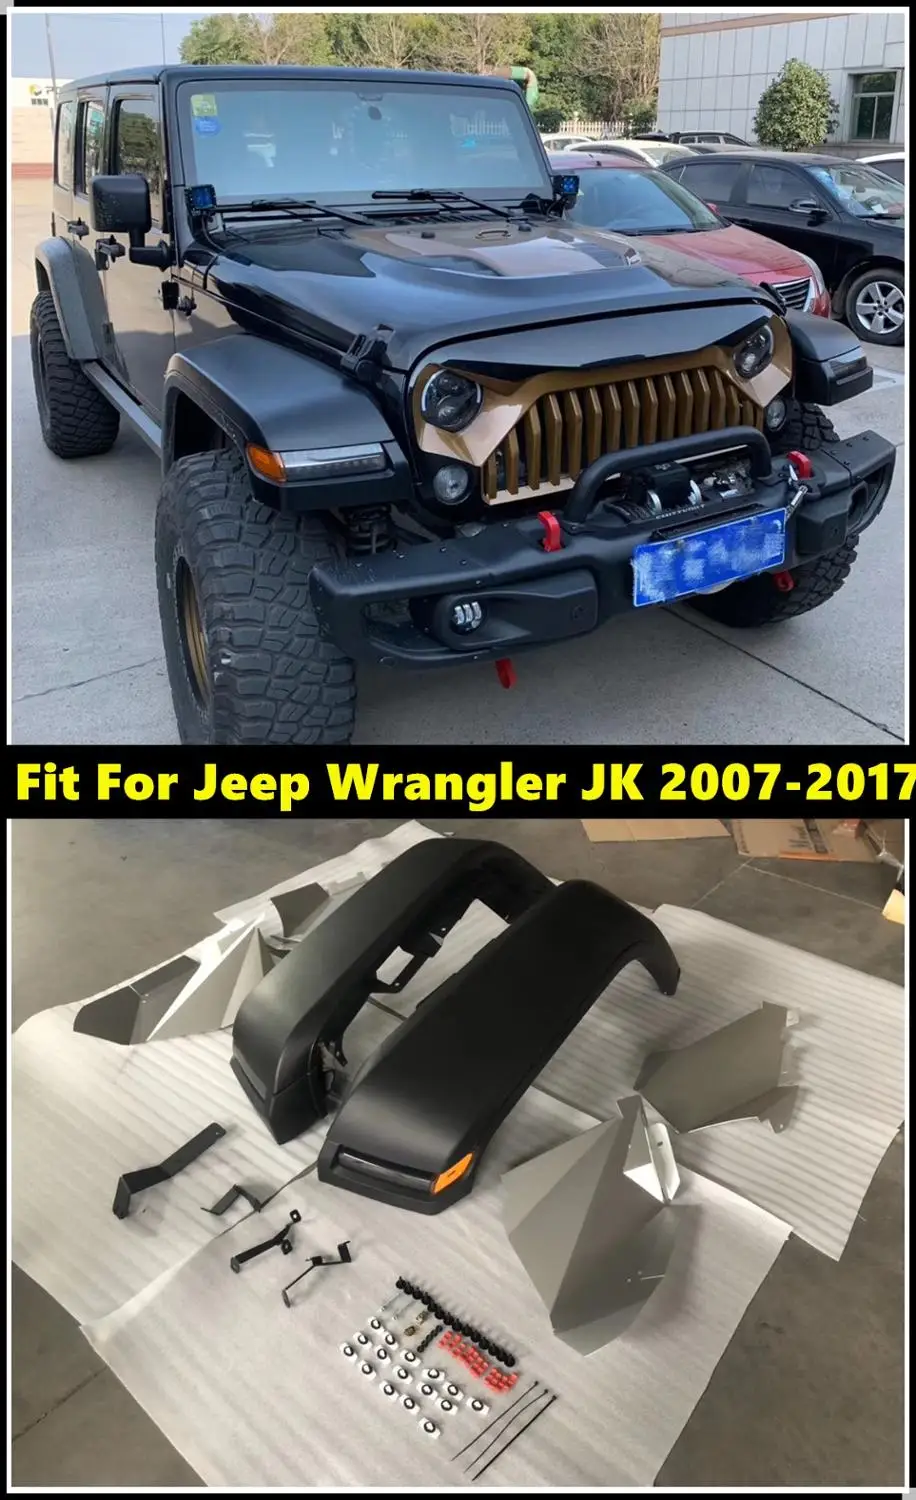 2 Pcs Car Wheel Eyebrow Mud Fender Cover Mudguards With Led Signal Lights  For Jeep Wrangler Jk 2007-2017 Old Style To New Look - Mudguards -  AliExpress